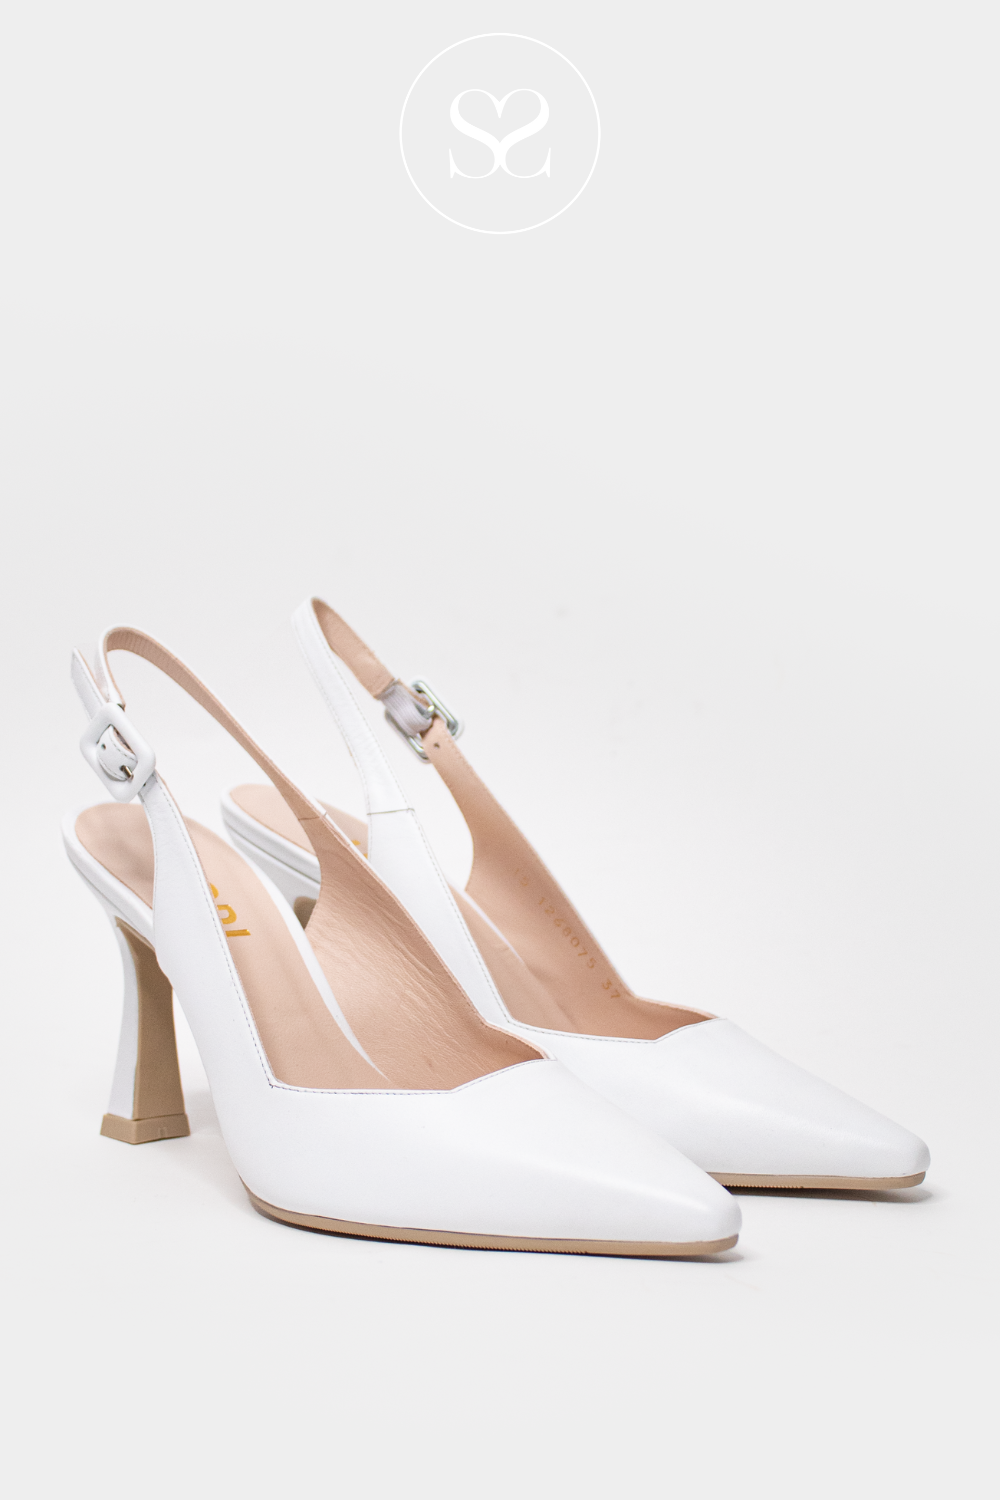 LODI HIGH HEEL SHOES WITH SLING BACK IN WHITE